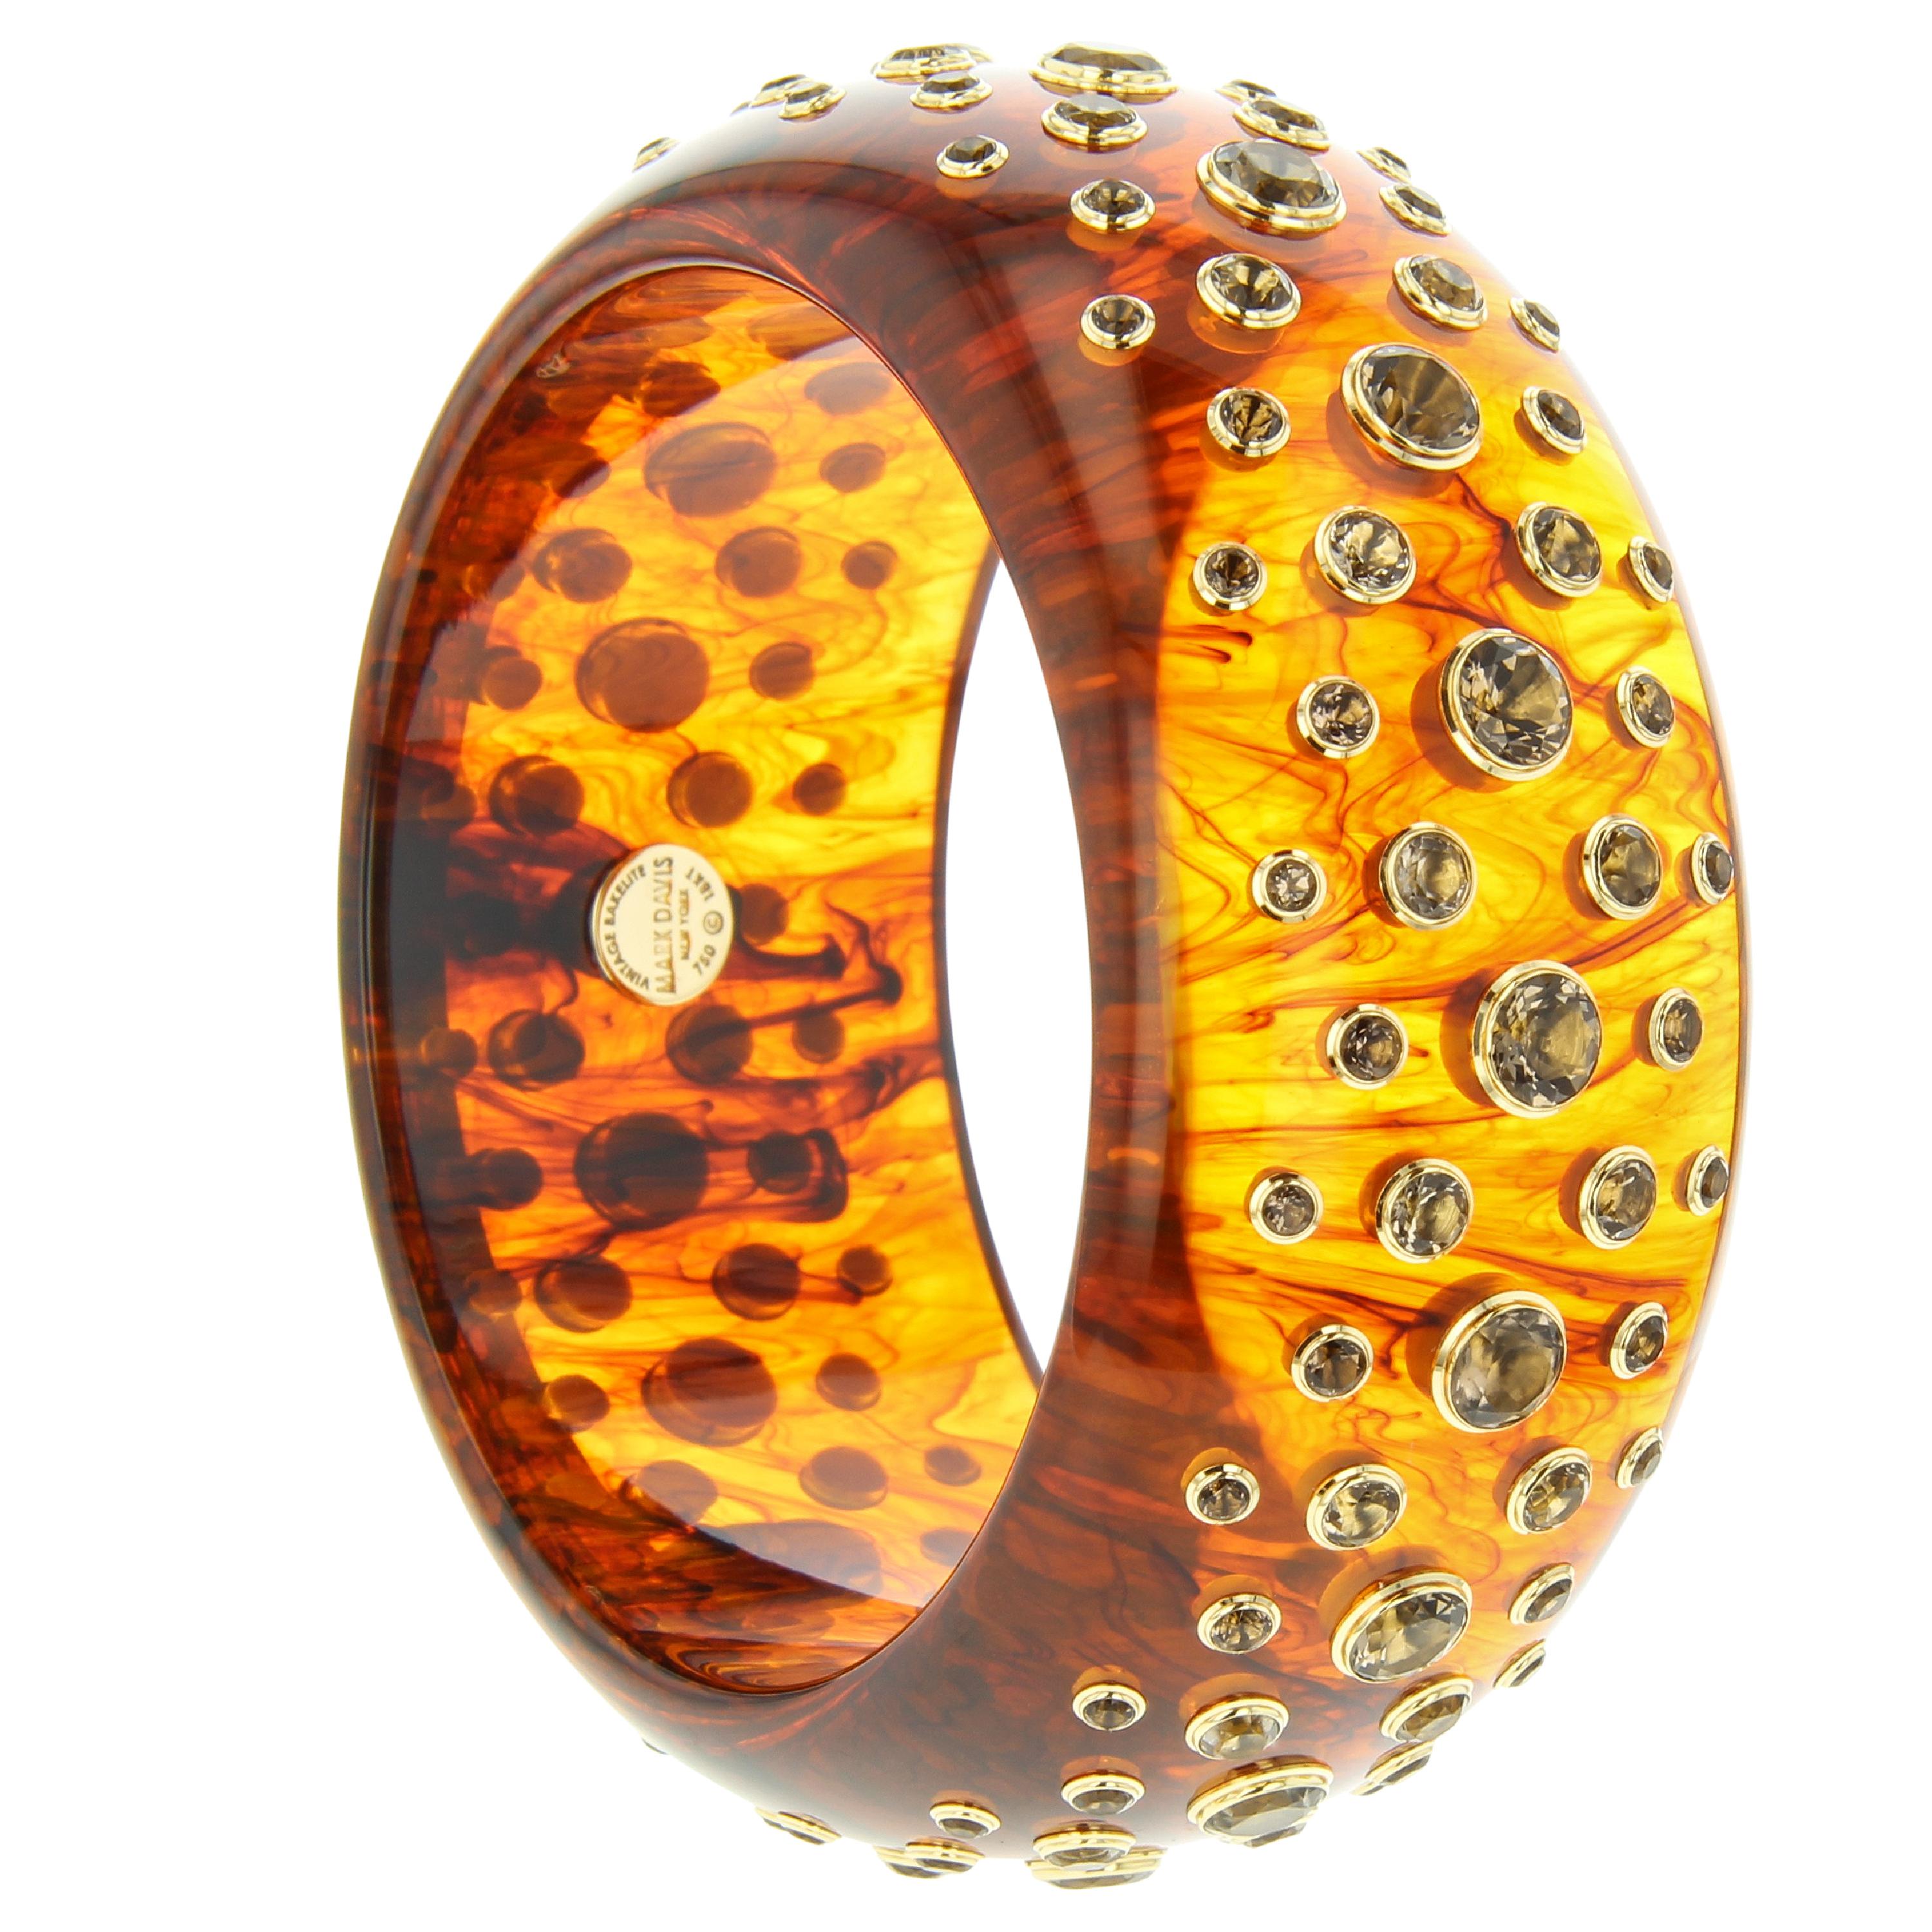 This Mark Davis bangle was handcrafted using a warm, honey-toned, tortoiseshell color vintage bakelite set with graduated smoky quartz in individual 18k yellow gold bezels.

Full details below:
• From the Mark Davis Bakelite line
• Vintage tortoise